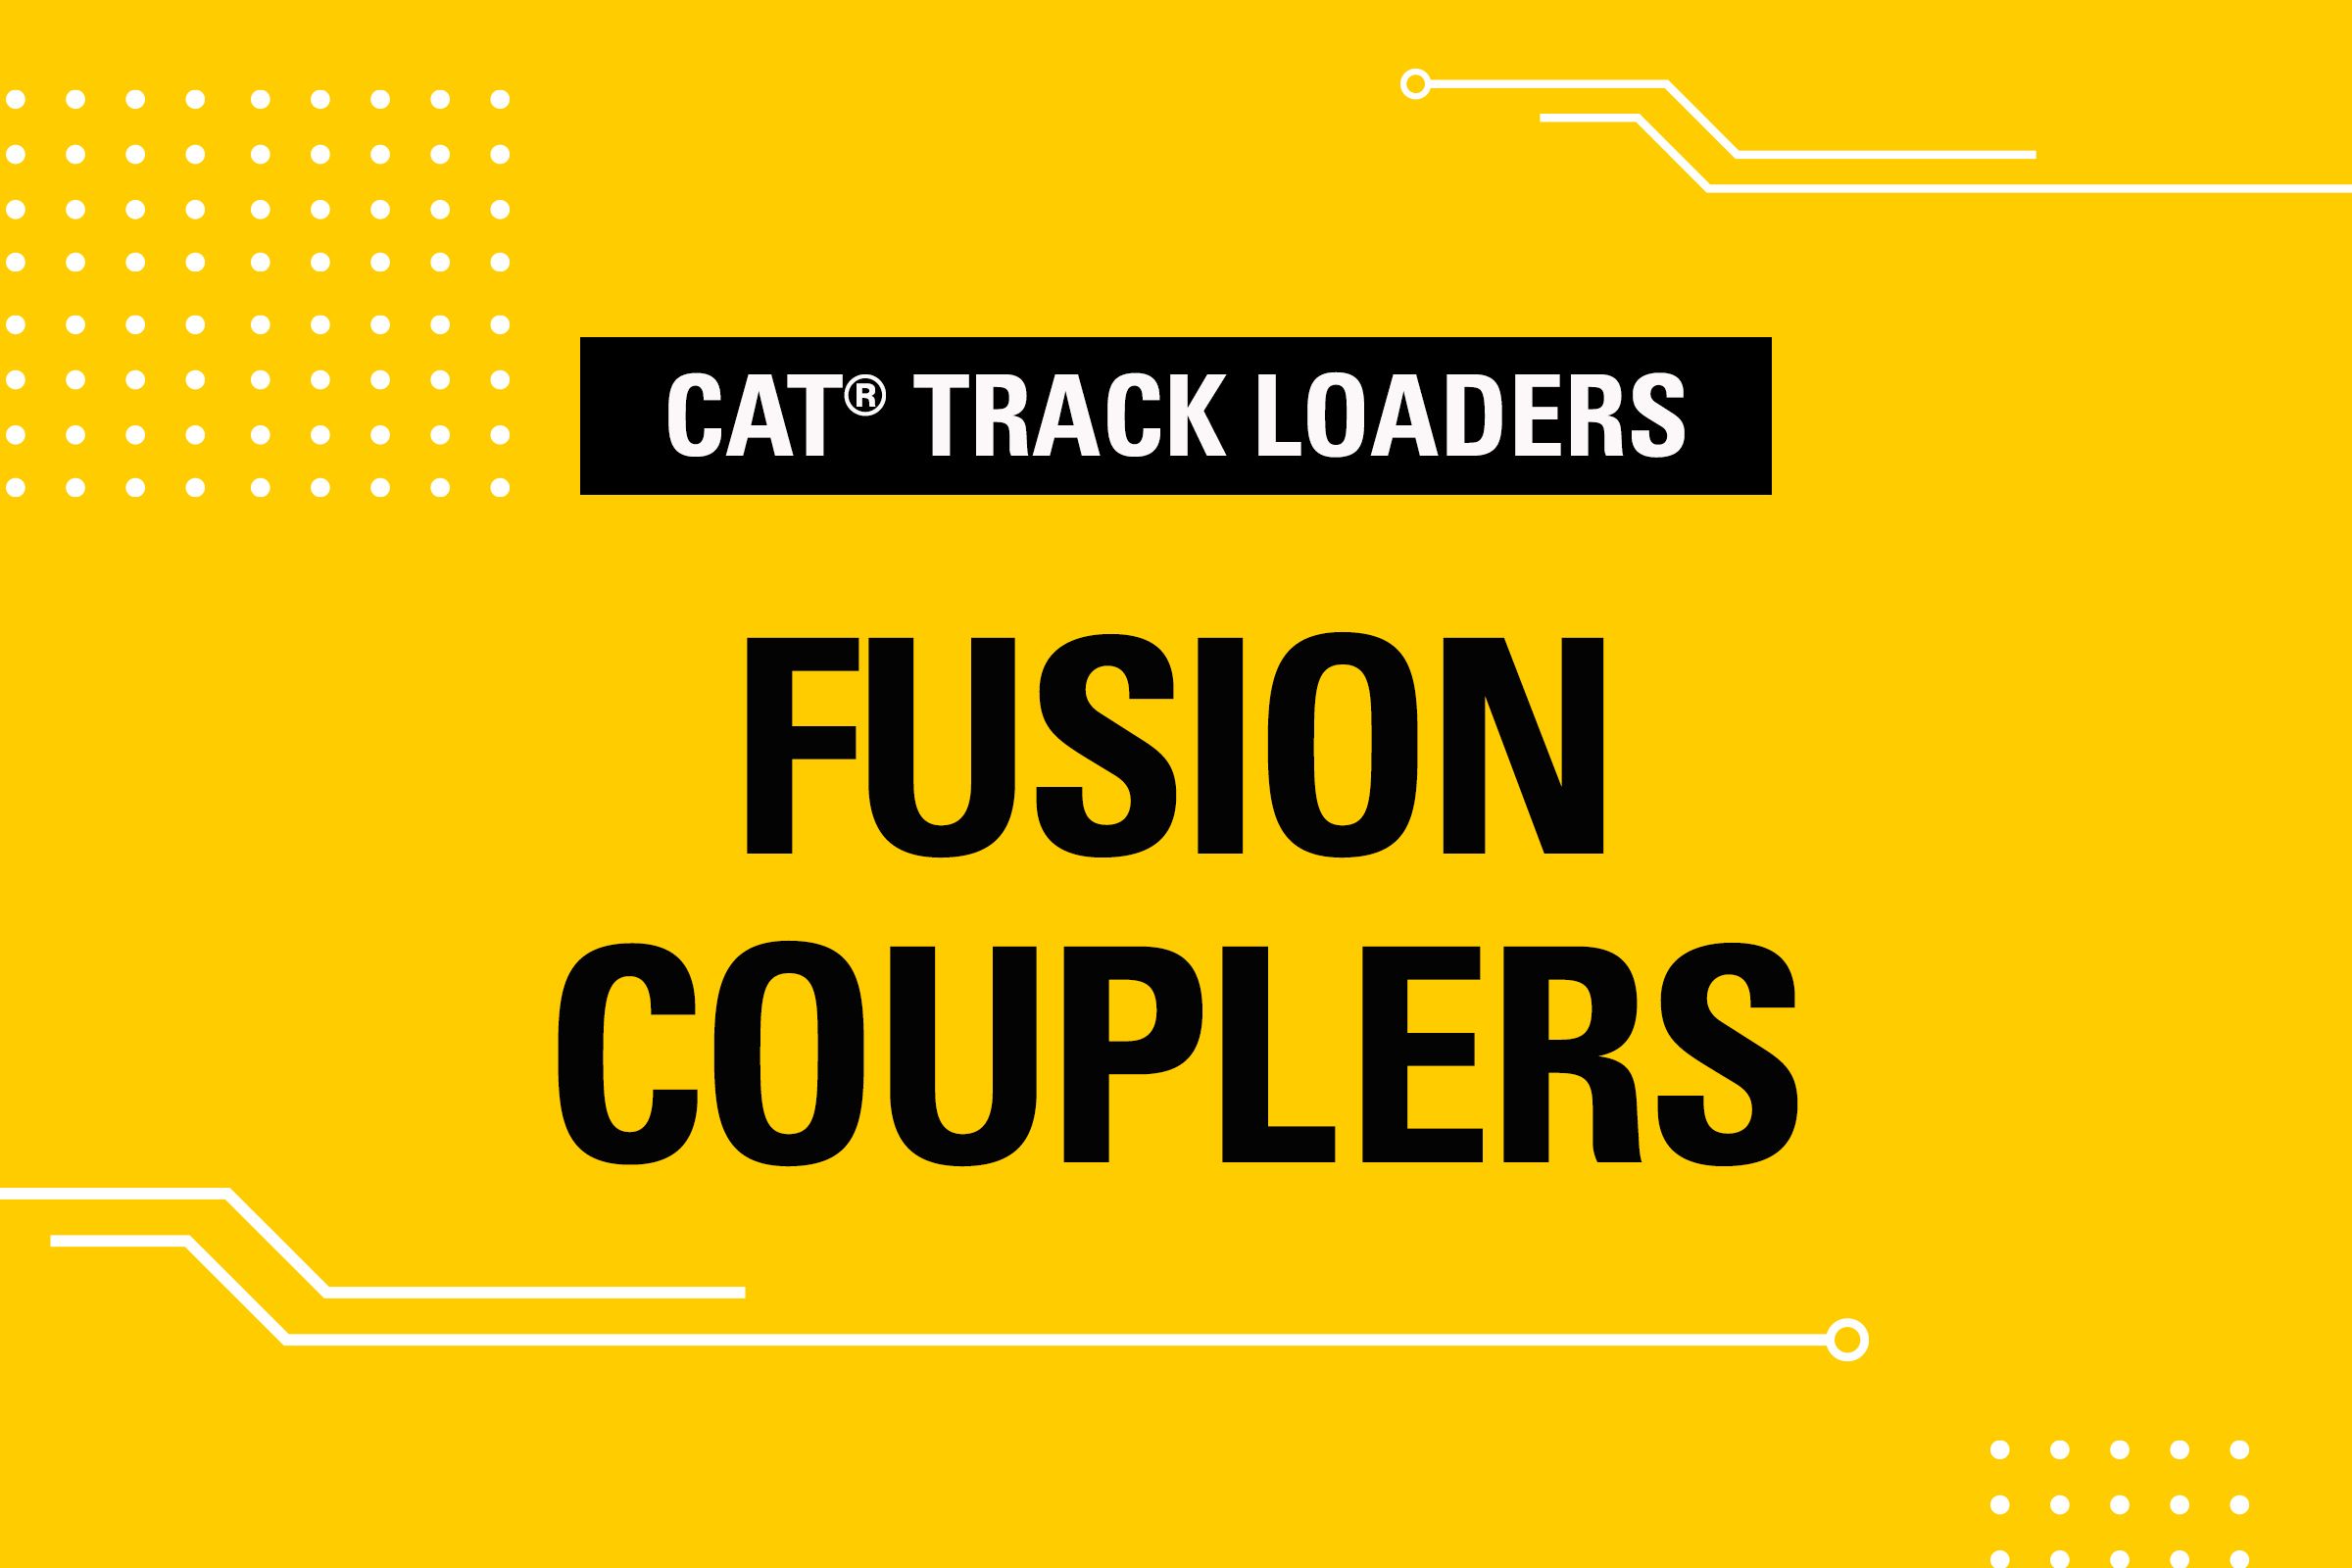 Fusion Couplers